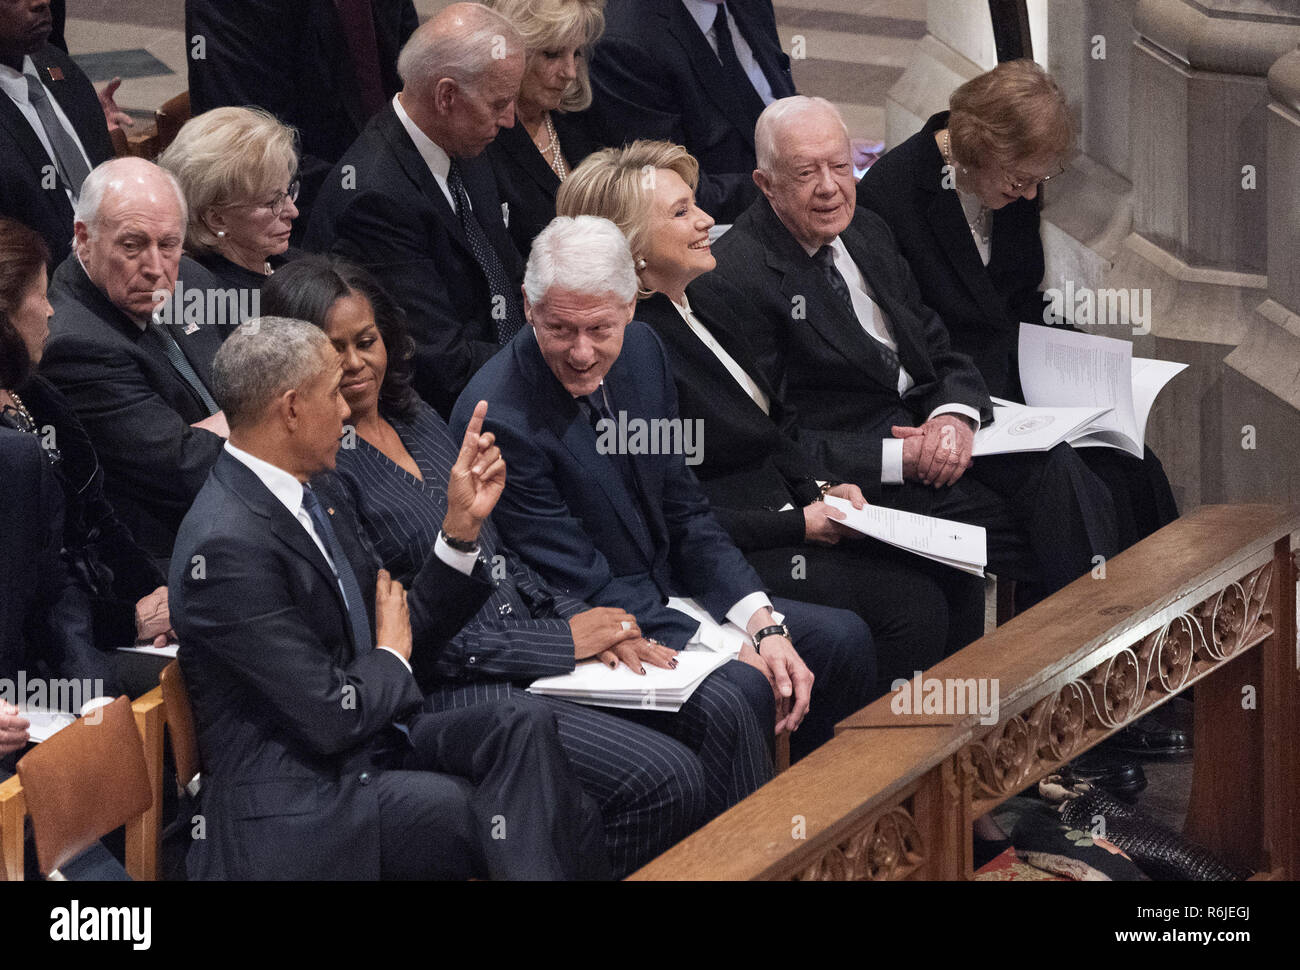 Washington, District of Columbia, USA. 5th Dec, 2018. December 5, 2018 - Washington, DC, United States: Barack Obama, Michelle Obama, Bill Clinton, Hillary Clinton, Jimmy Carter and Rosalyn Carter attend the state funeral service of former President George W. Bush at the National Cathedral. Credit: ZUMA Press, Inc./Alamy Live News Stock Photo